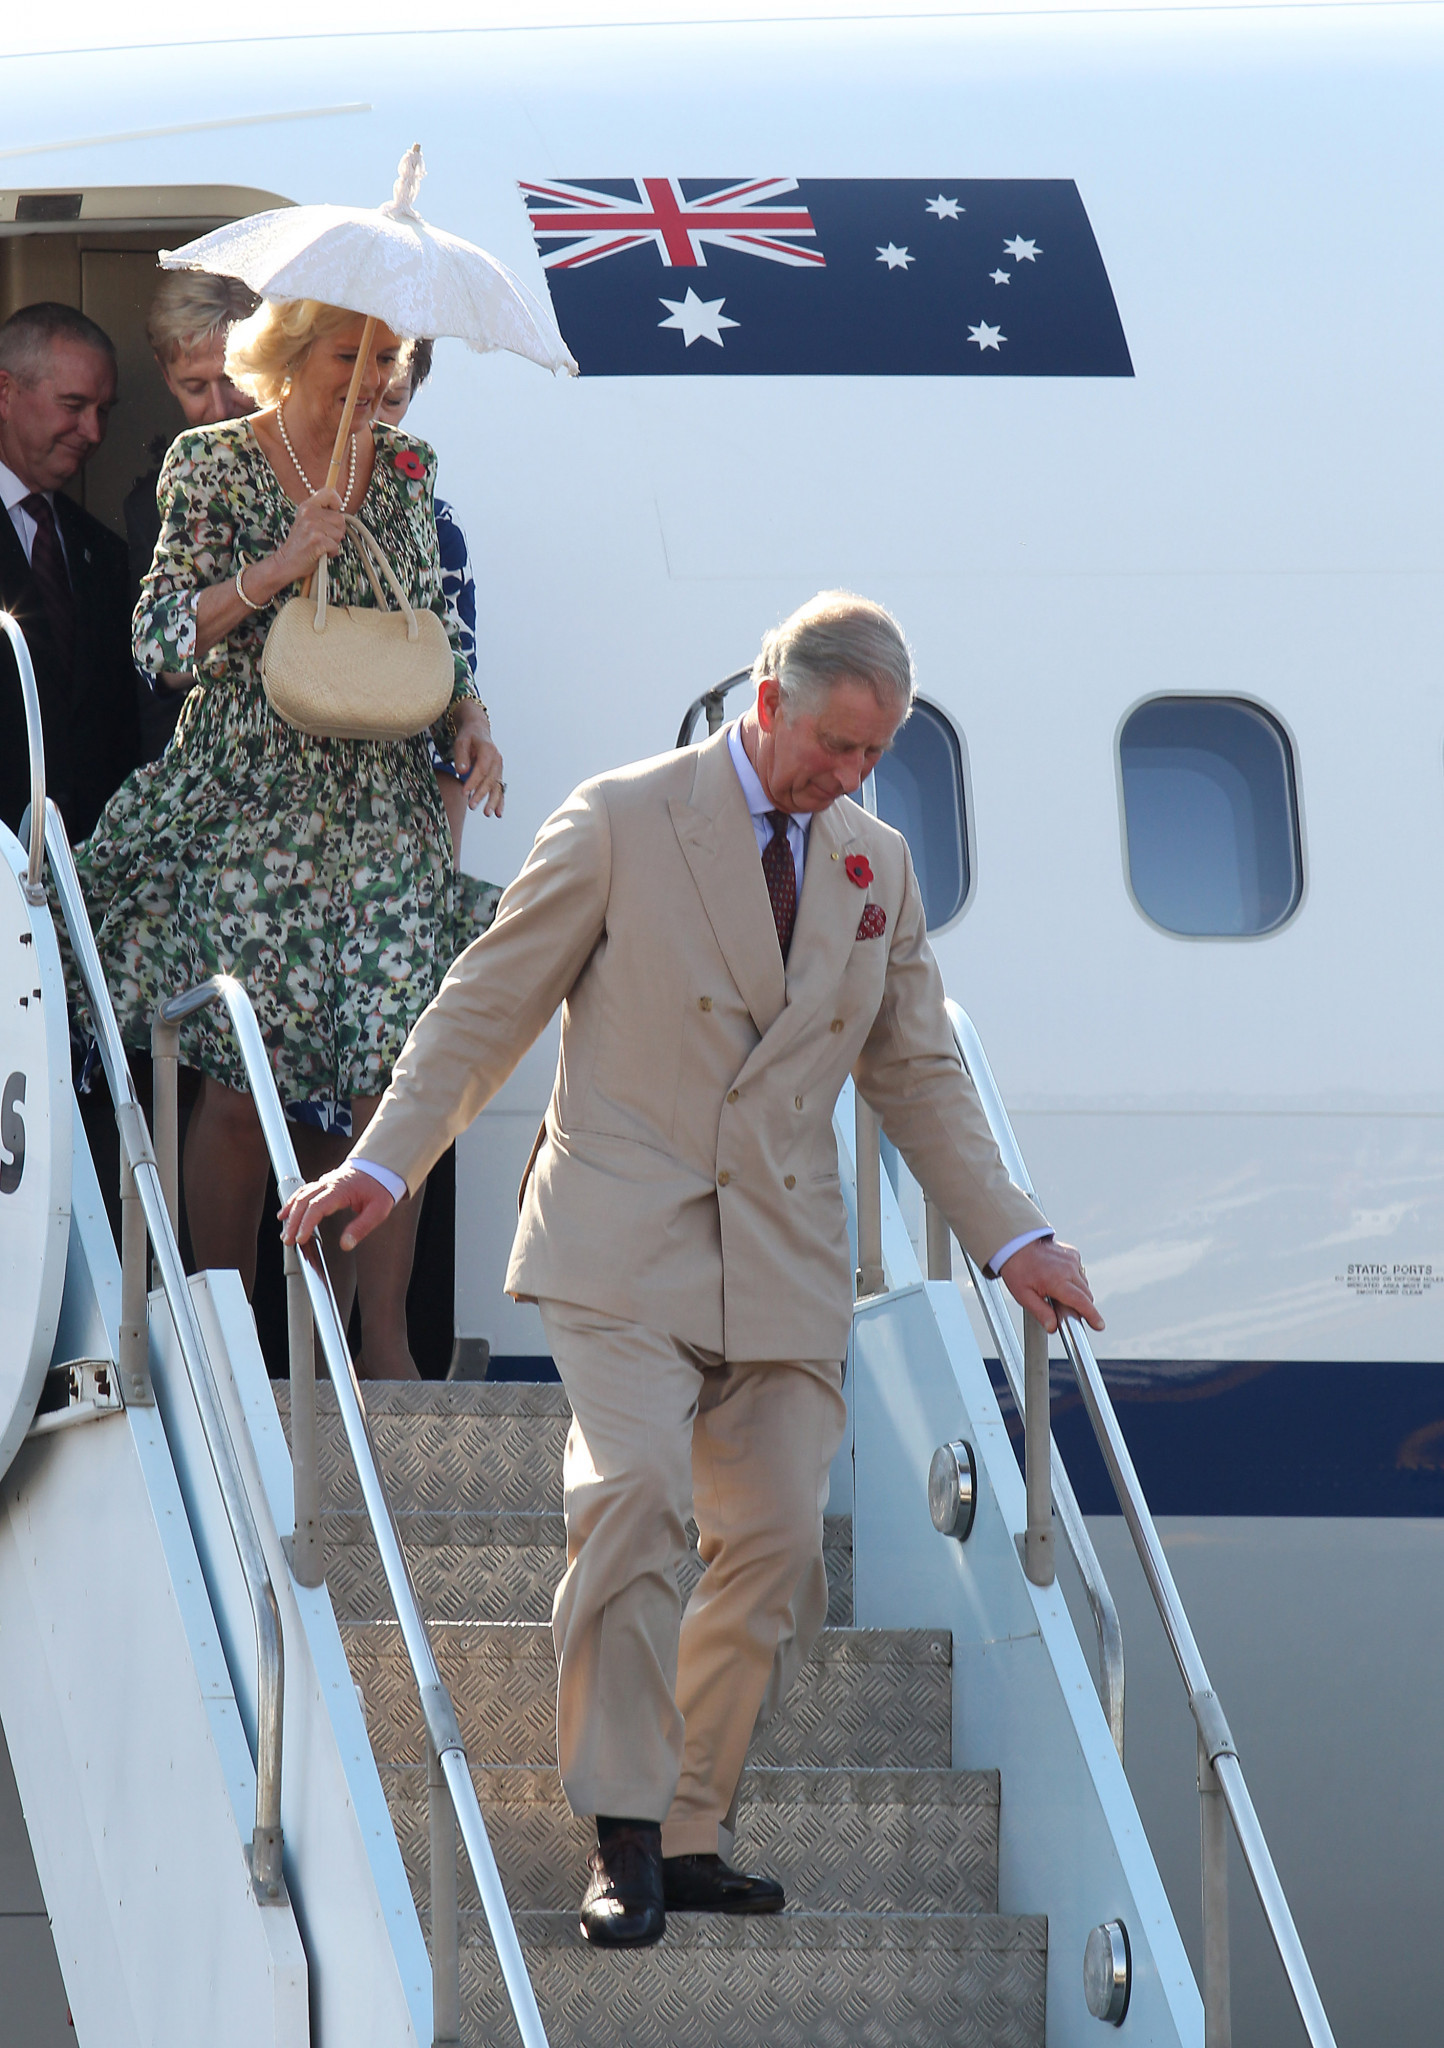 Charles and Camilla visited Queensland in 2012 ©Getty Images